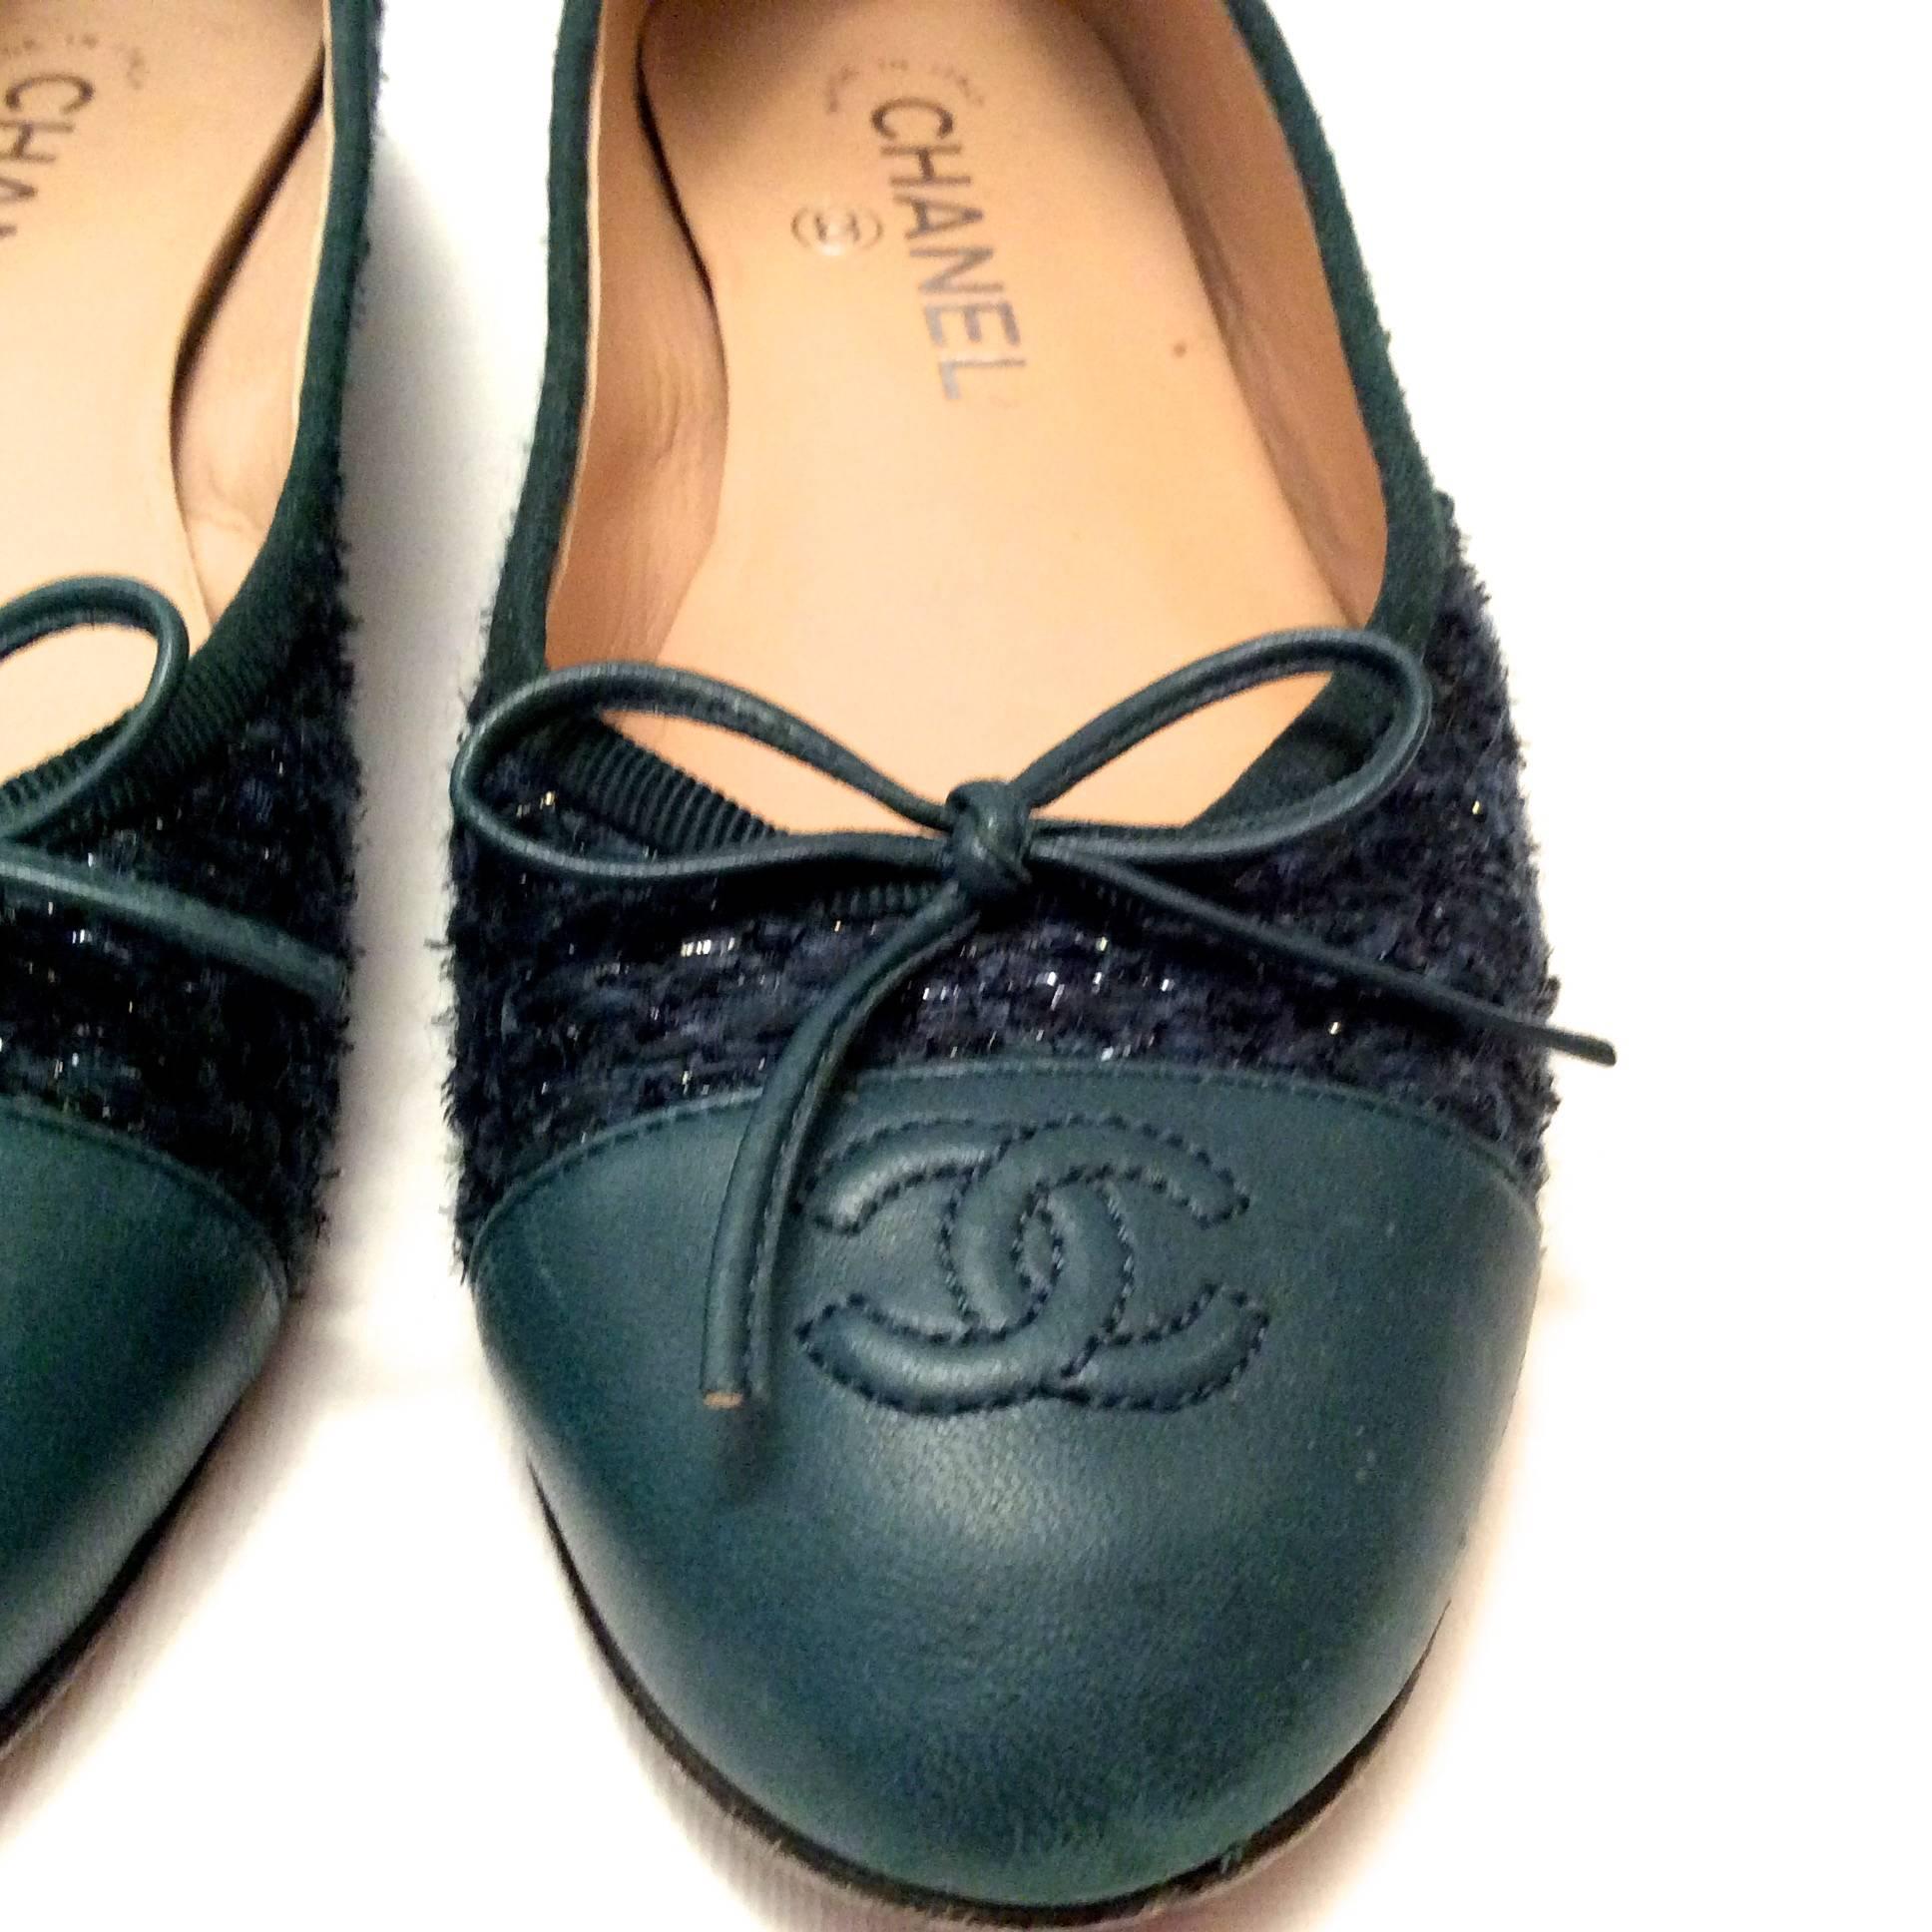 These Chanel Ballerina flats are a classic that are a must for any personal wardrobe. They are size 38 and are a comination of a dark teal / forest green tweed blend with splashes of silver in the tweed. The tips of the shoes are a hunter green. The